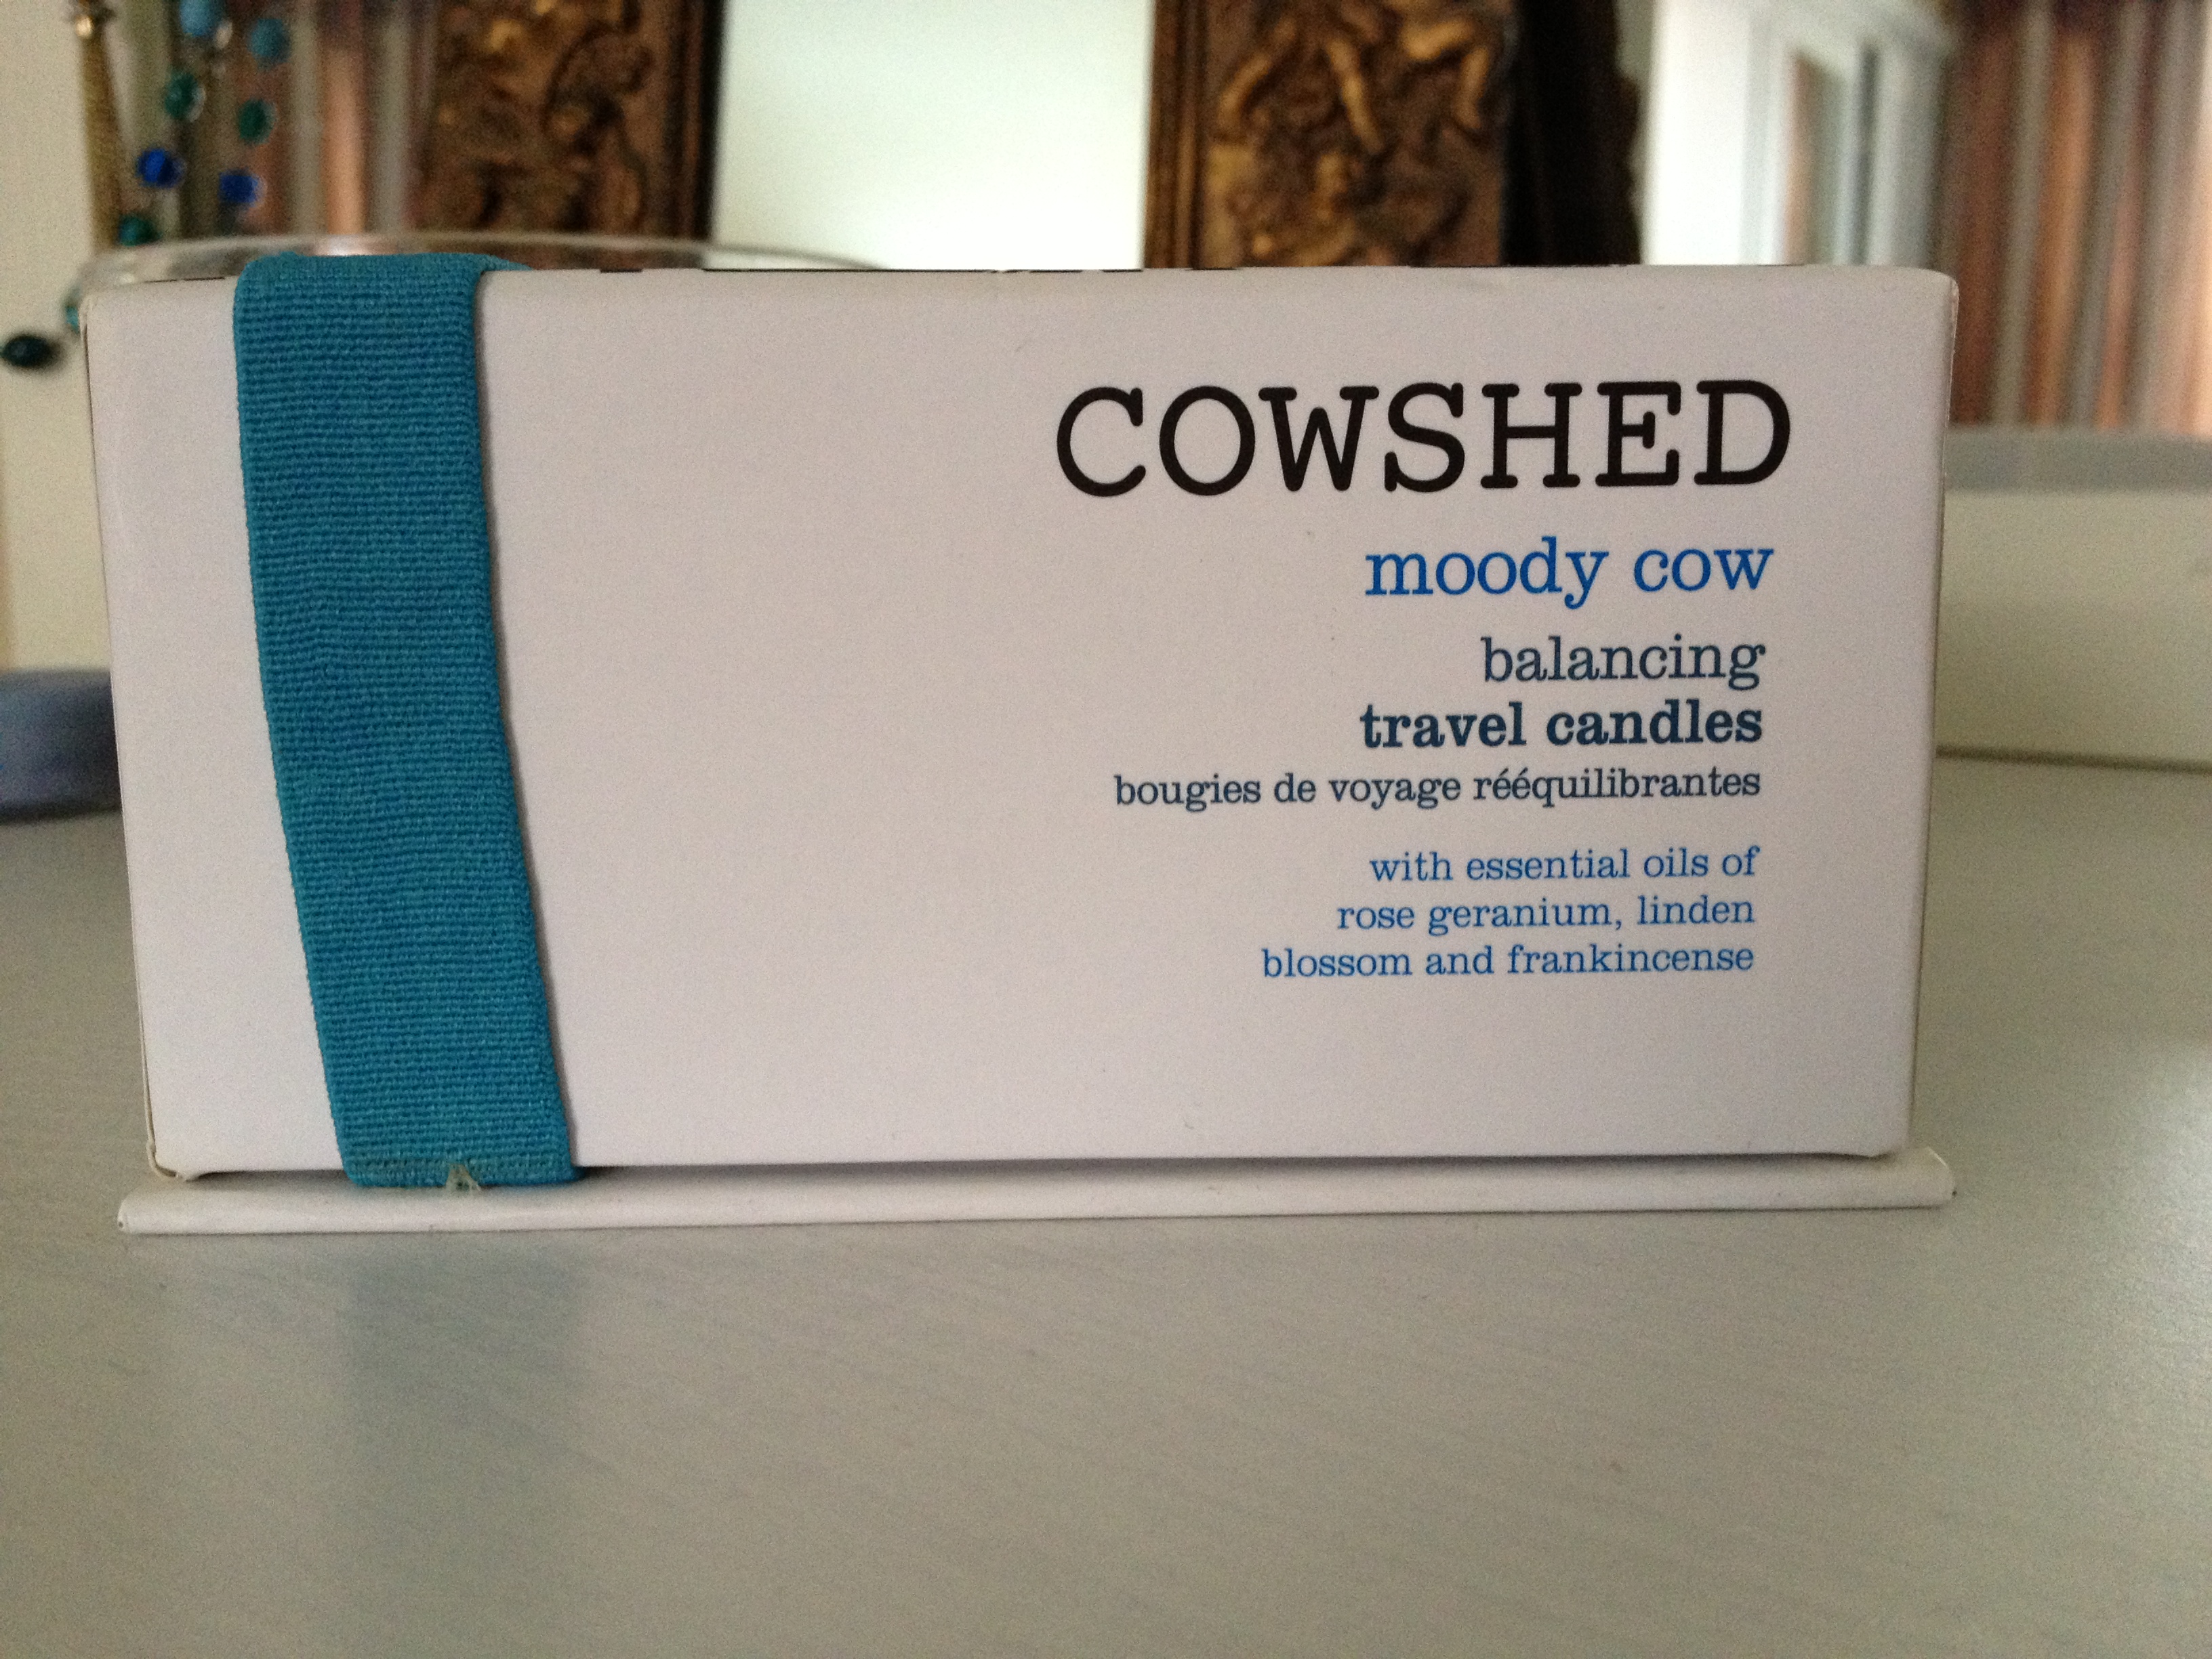 Cowshed_Moody_Cow_Balancing_Travel_Candles (3)